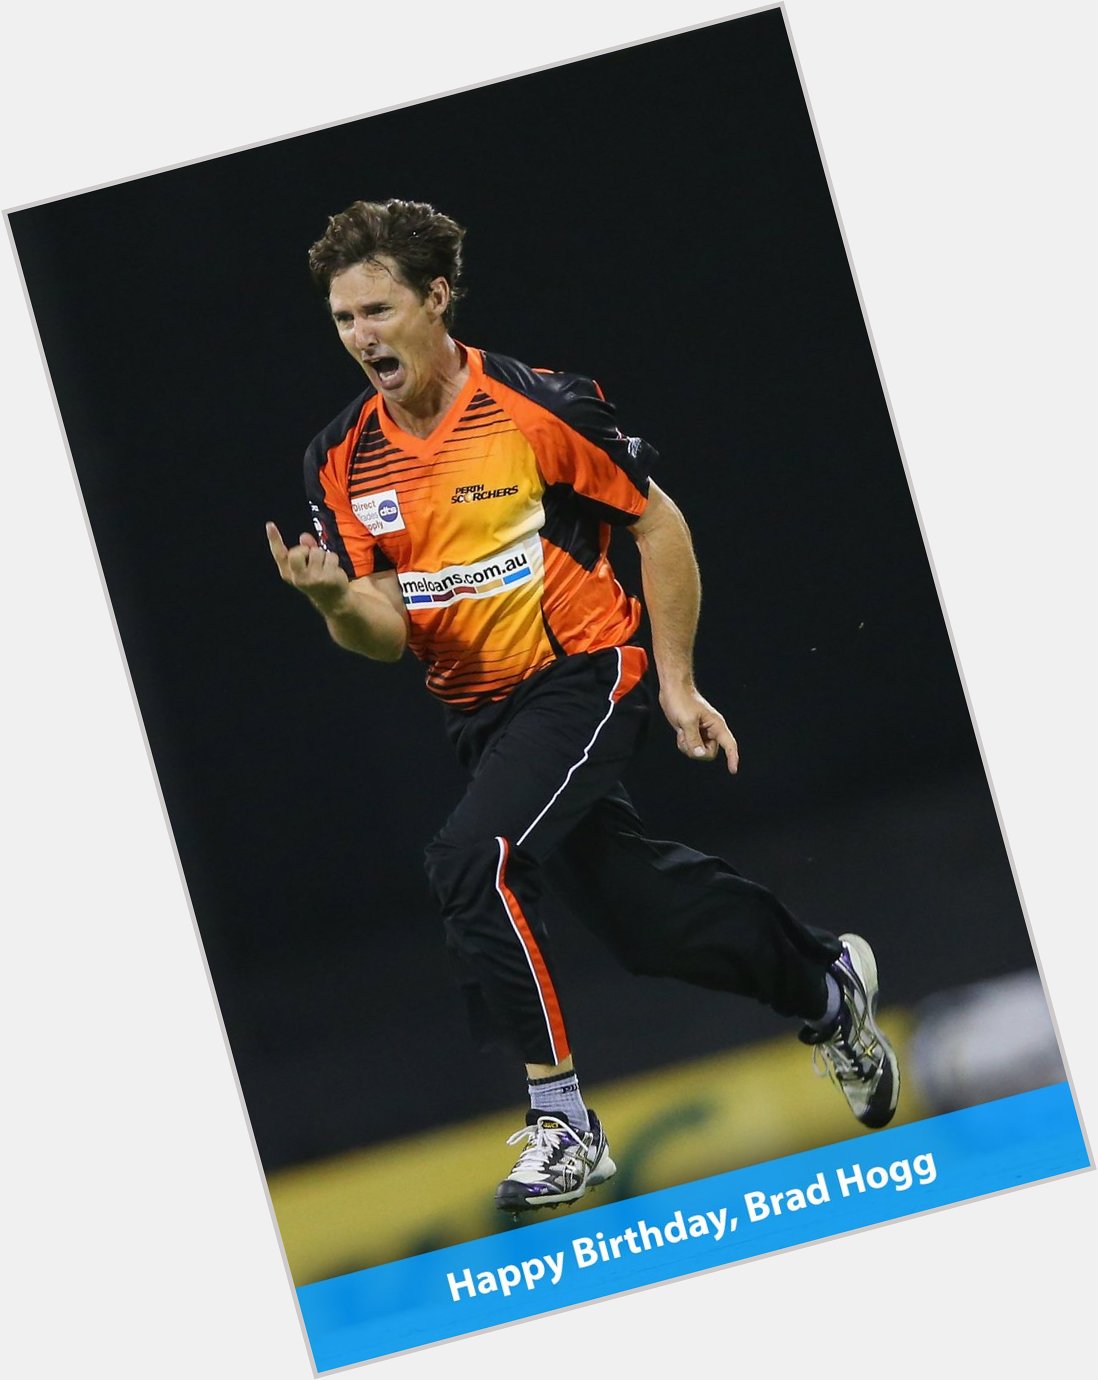 He\s 46 today and still going strong. Happy birthday, Brad Hogg: 